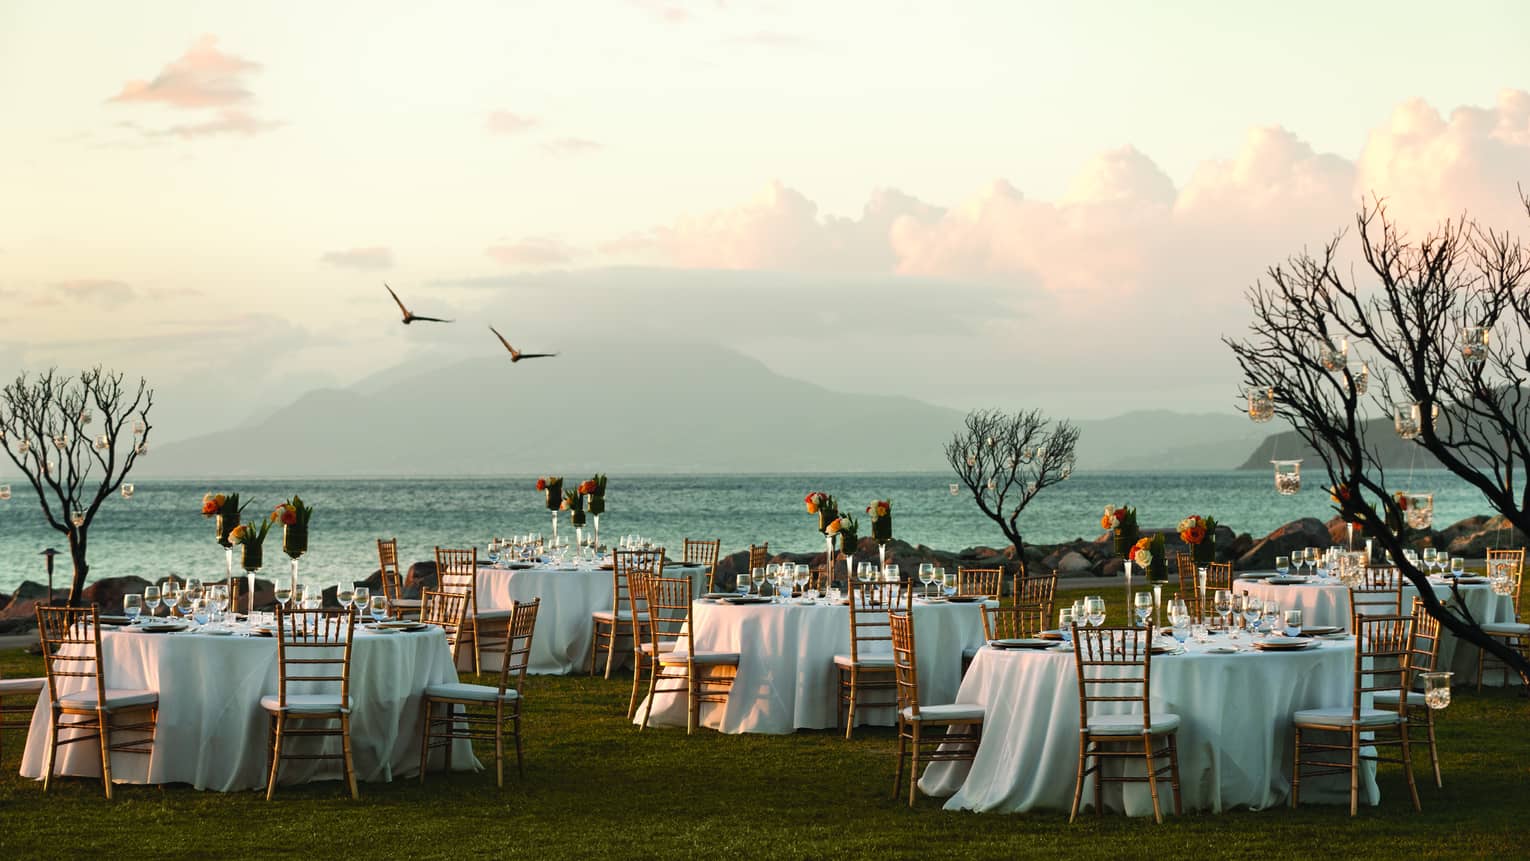 Two birds fly over outdoor dining tables, small trees on lawn by ocean 